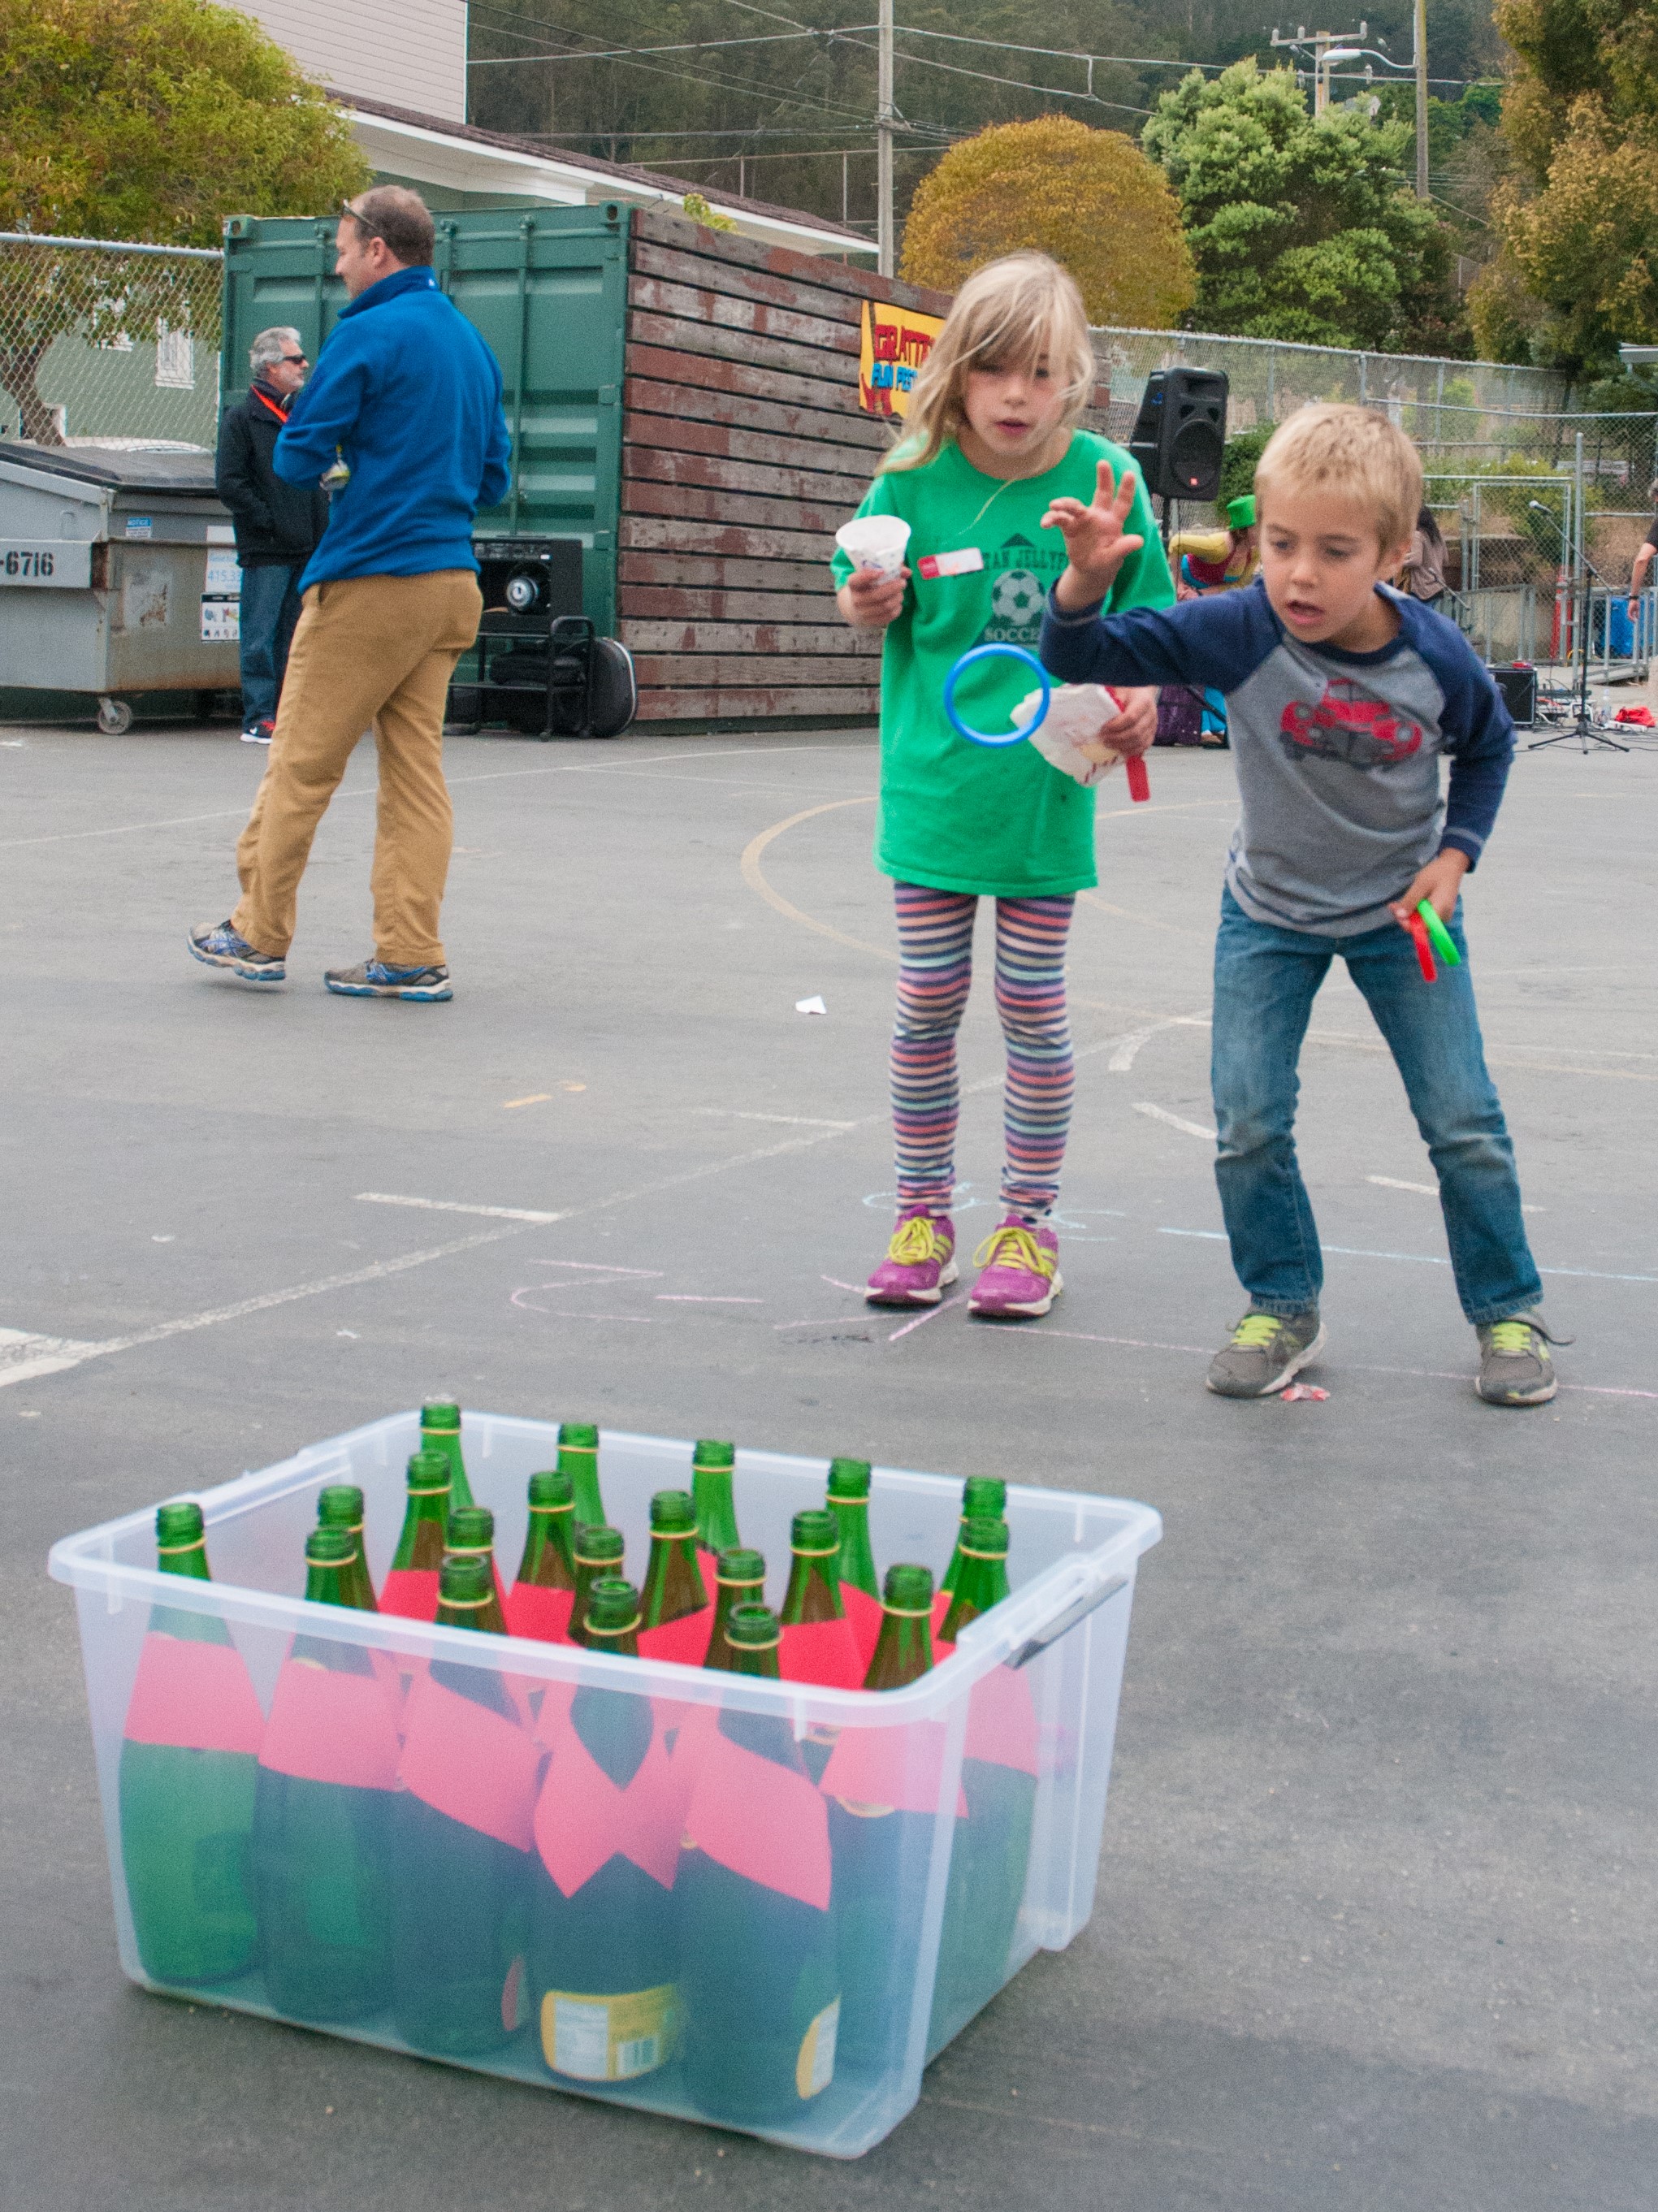 Children playing ring toss at an outdoor school festival